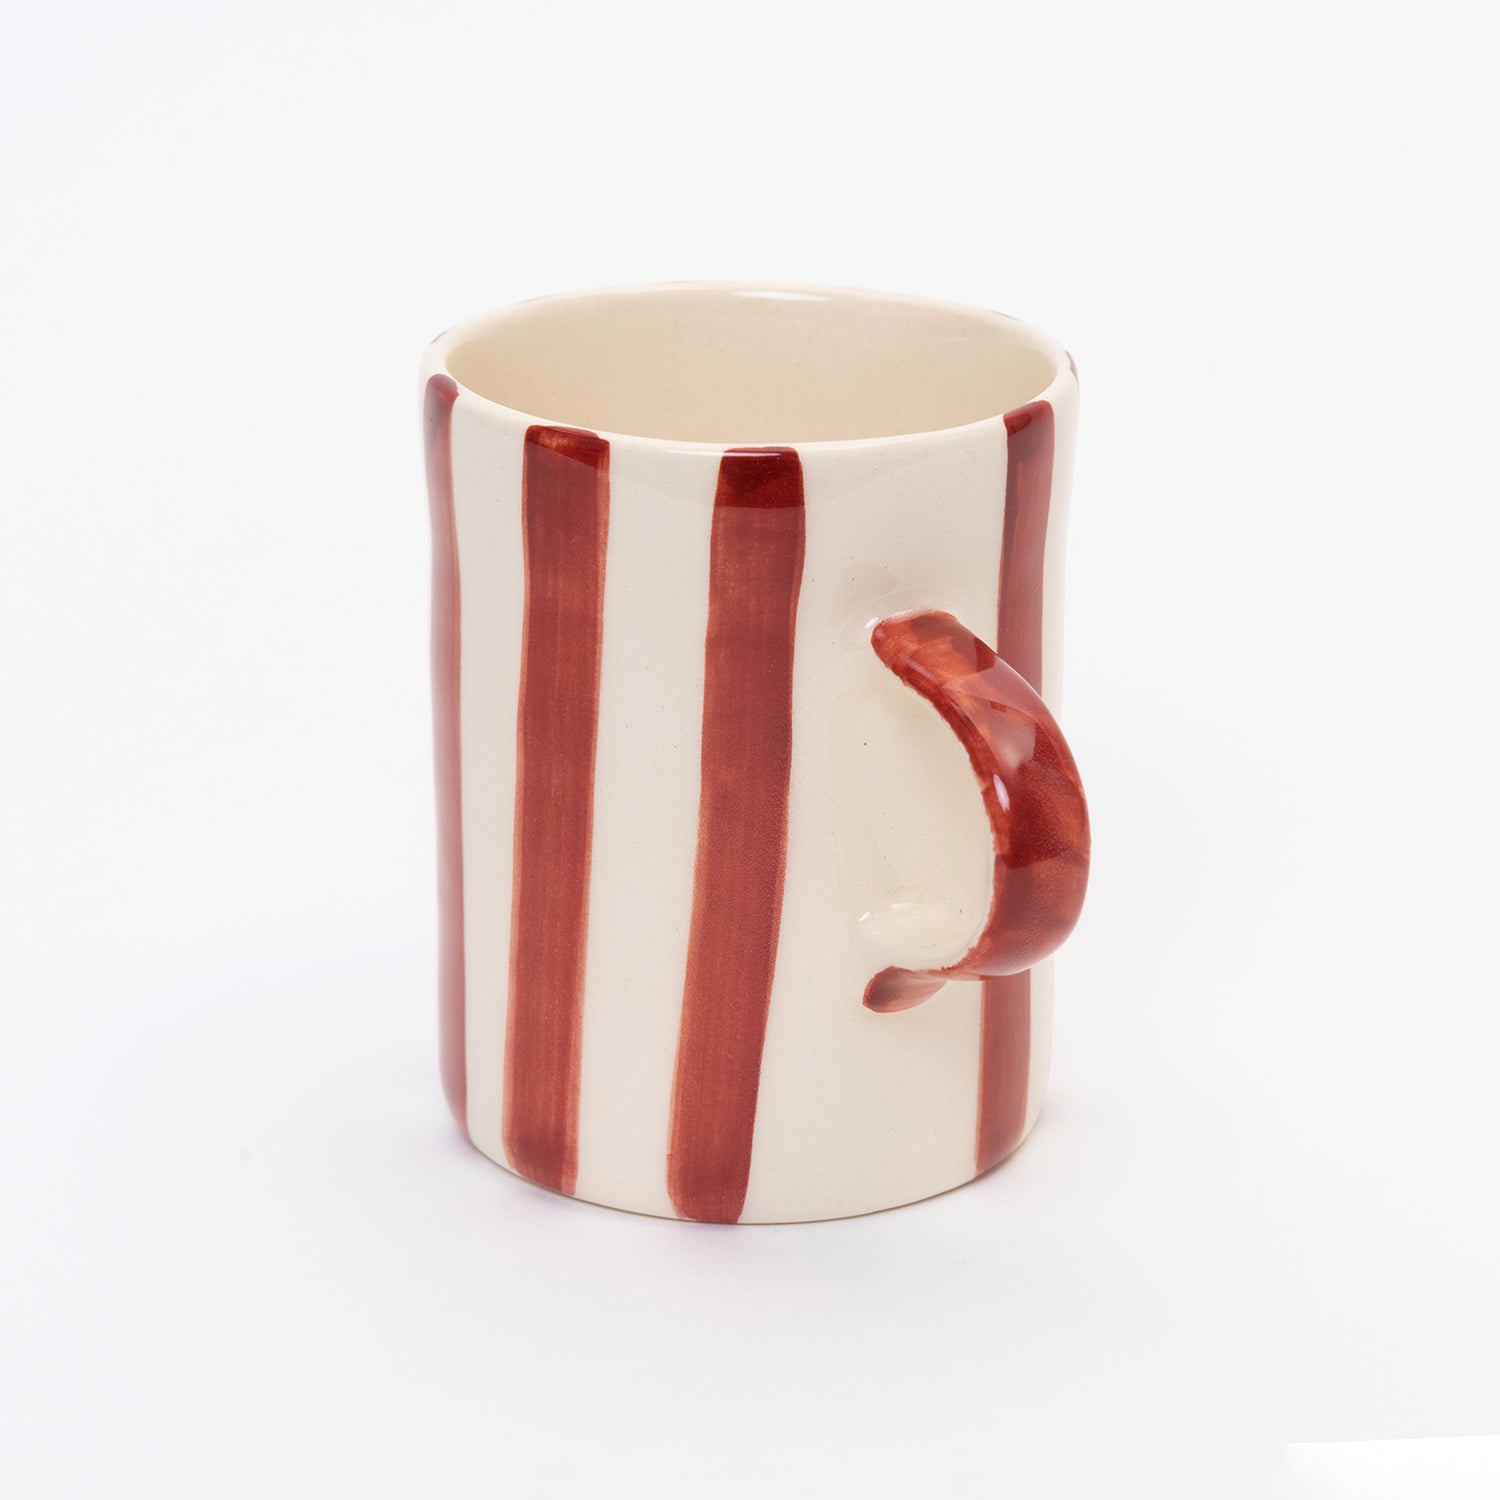 Side shot of Red and white striped mug with red handle